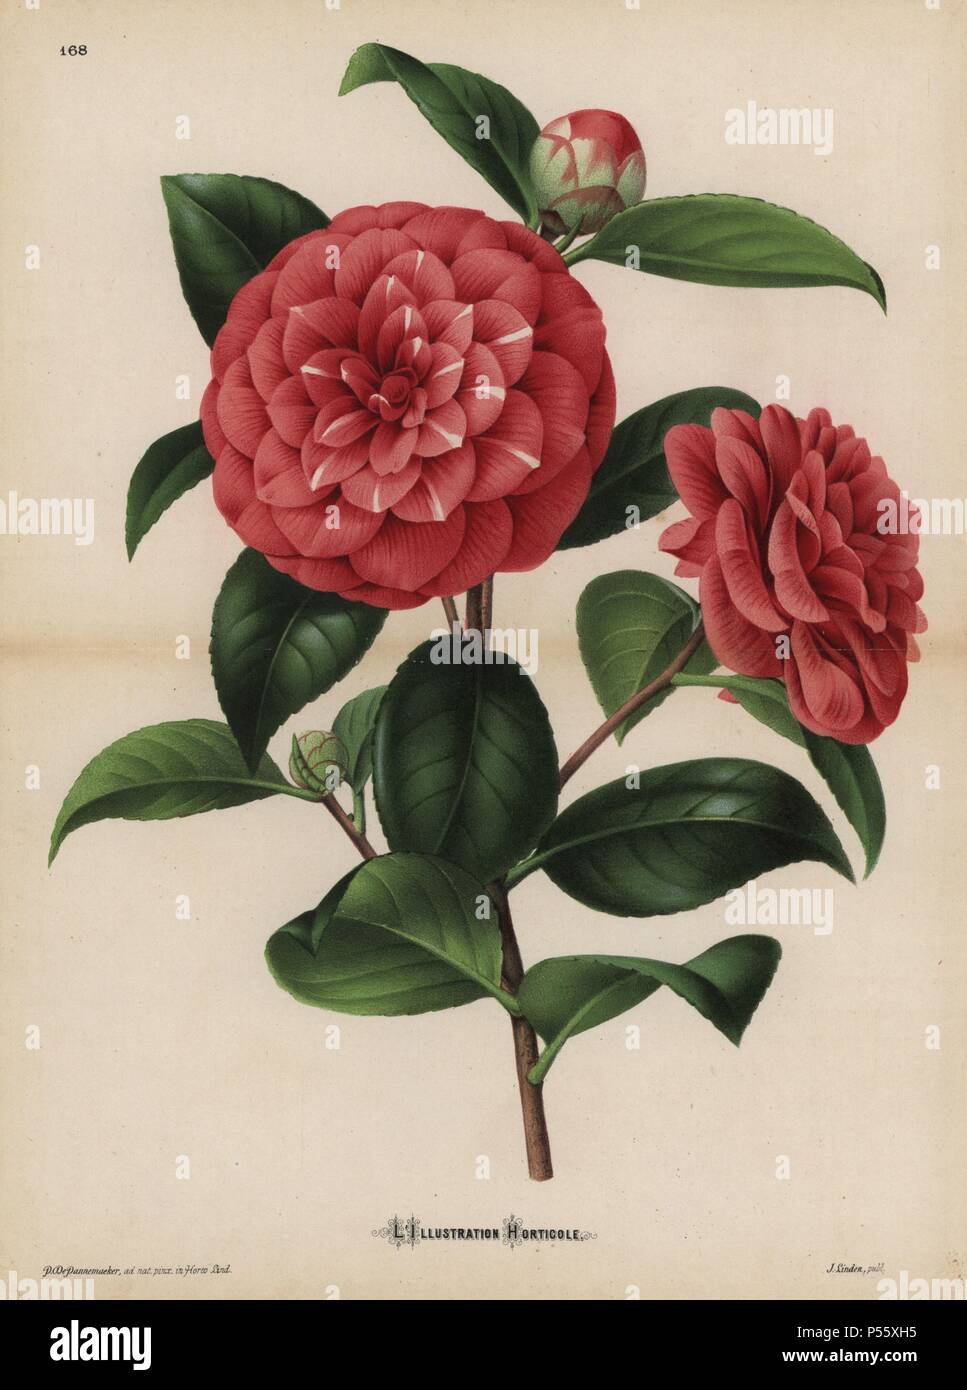 Scarlet and white striped camellia. Camellia japonica, Thea japonica. Chromolithograph drawn from life by P. de Pannemaeker, for Jean Linden's 'L'Illustration Horticole' published in Ghent in 1886. Jean Linden (1817-1898) was a Belgian explorer, horticulturist, scientist and publisher of botanical books. Stock Photo